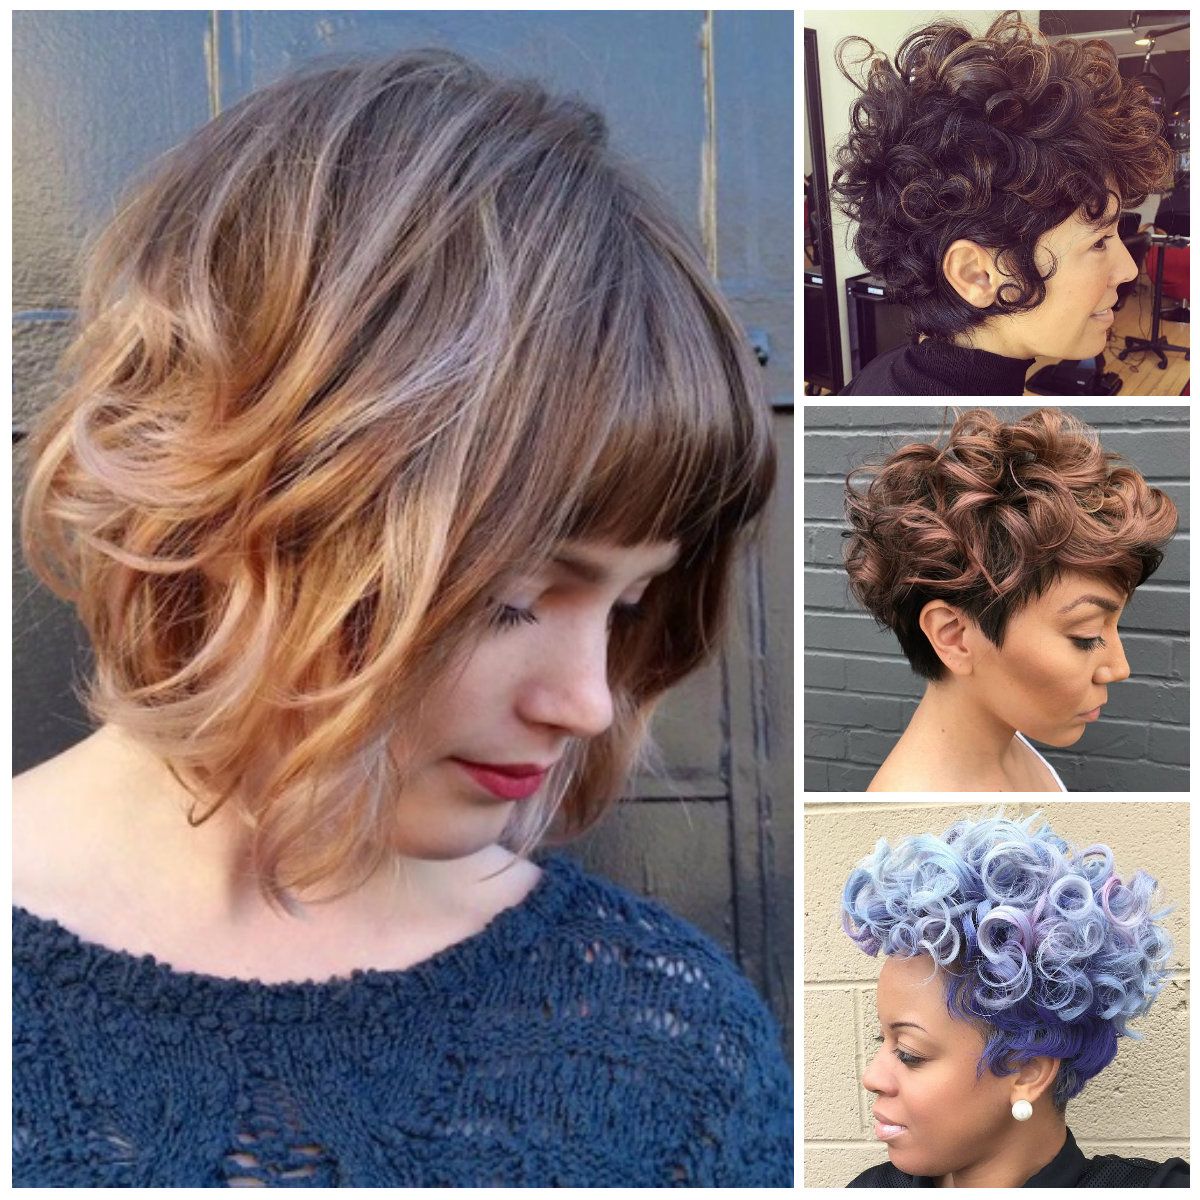 40 Super Cute Short Bob Hairstyles For Women 2018 | Styles Weekly Regarding Short Bob For Curly Hairstyles (Photo 15 of 25)